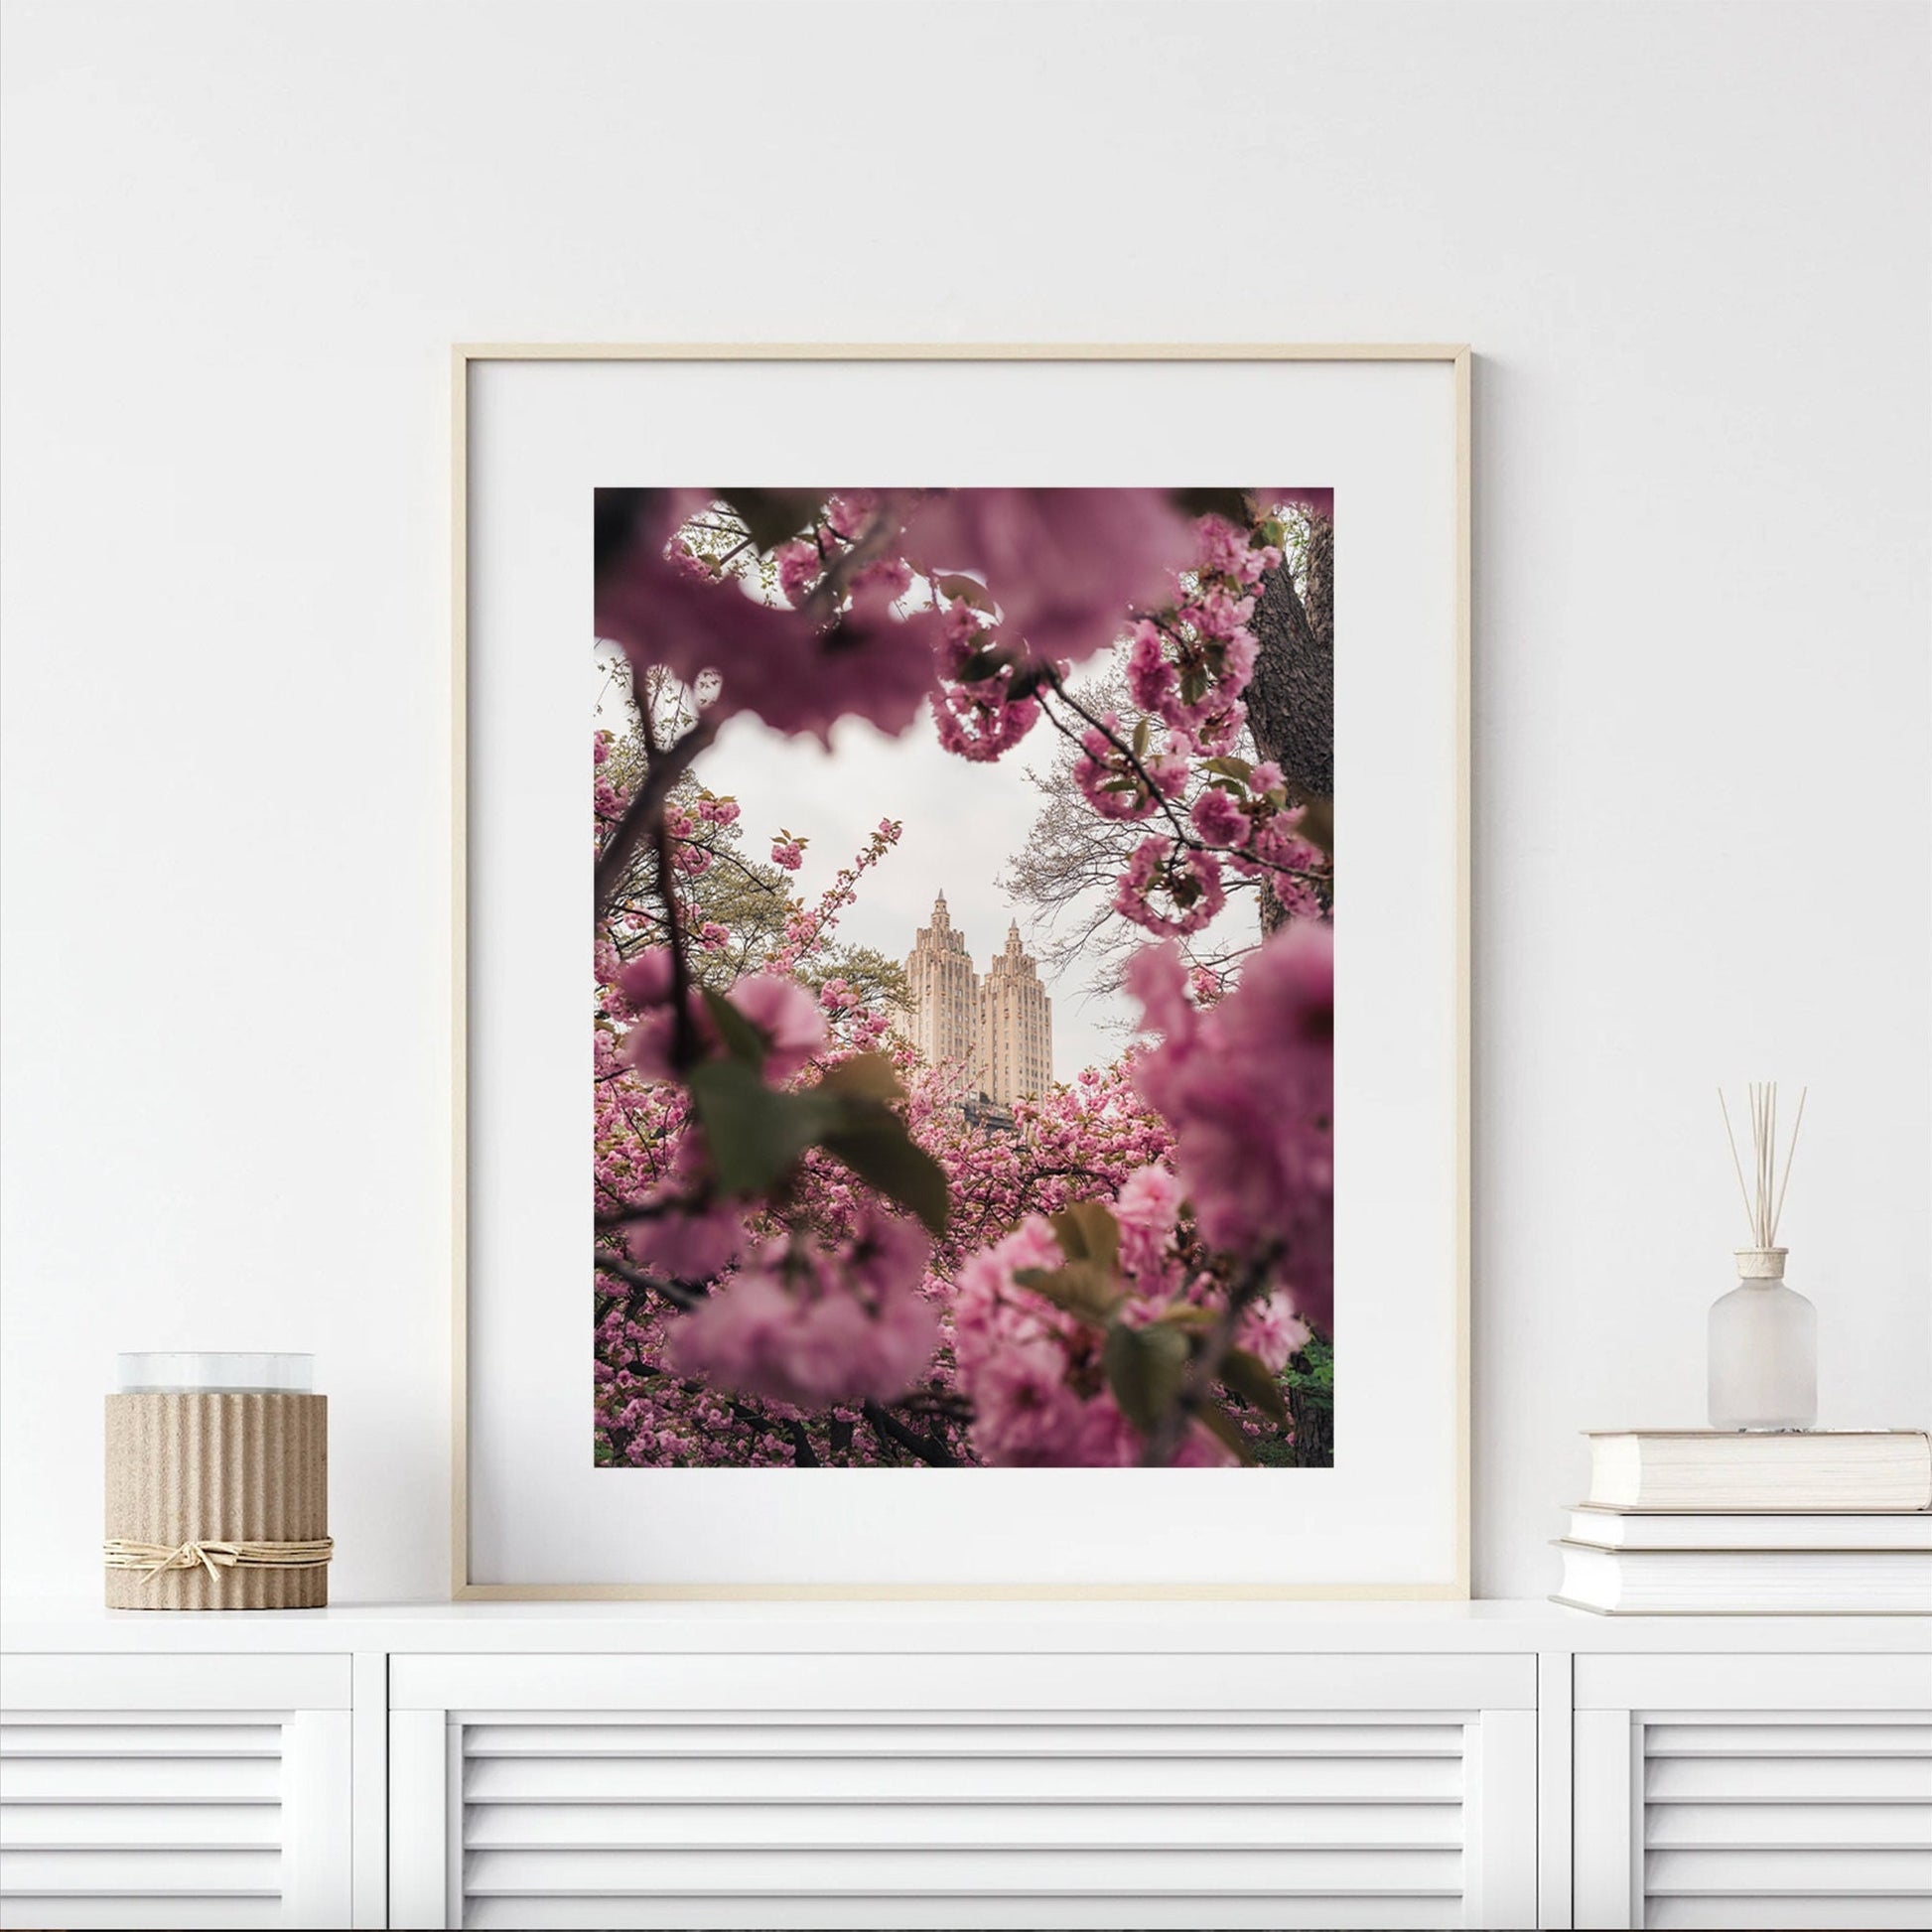 Central Park Cherryblossom Wallart Pink Flower Print NYC Cherry Blossom Photography Pink NYC Print Floral Home Decor Large Pink Wallart Gift